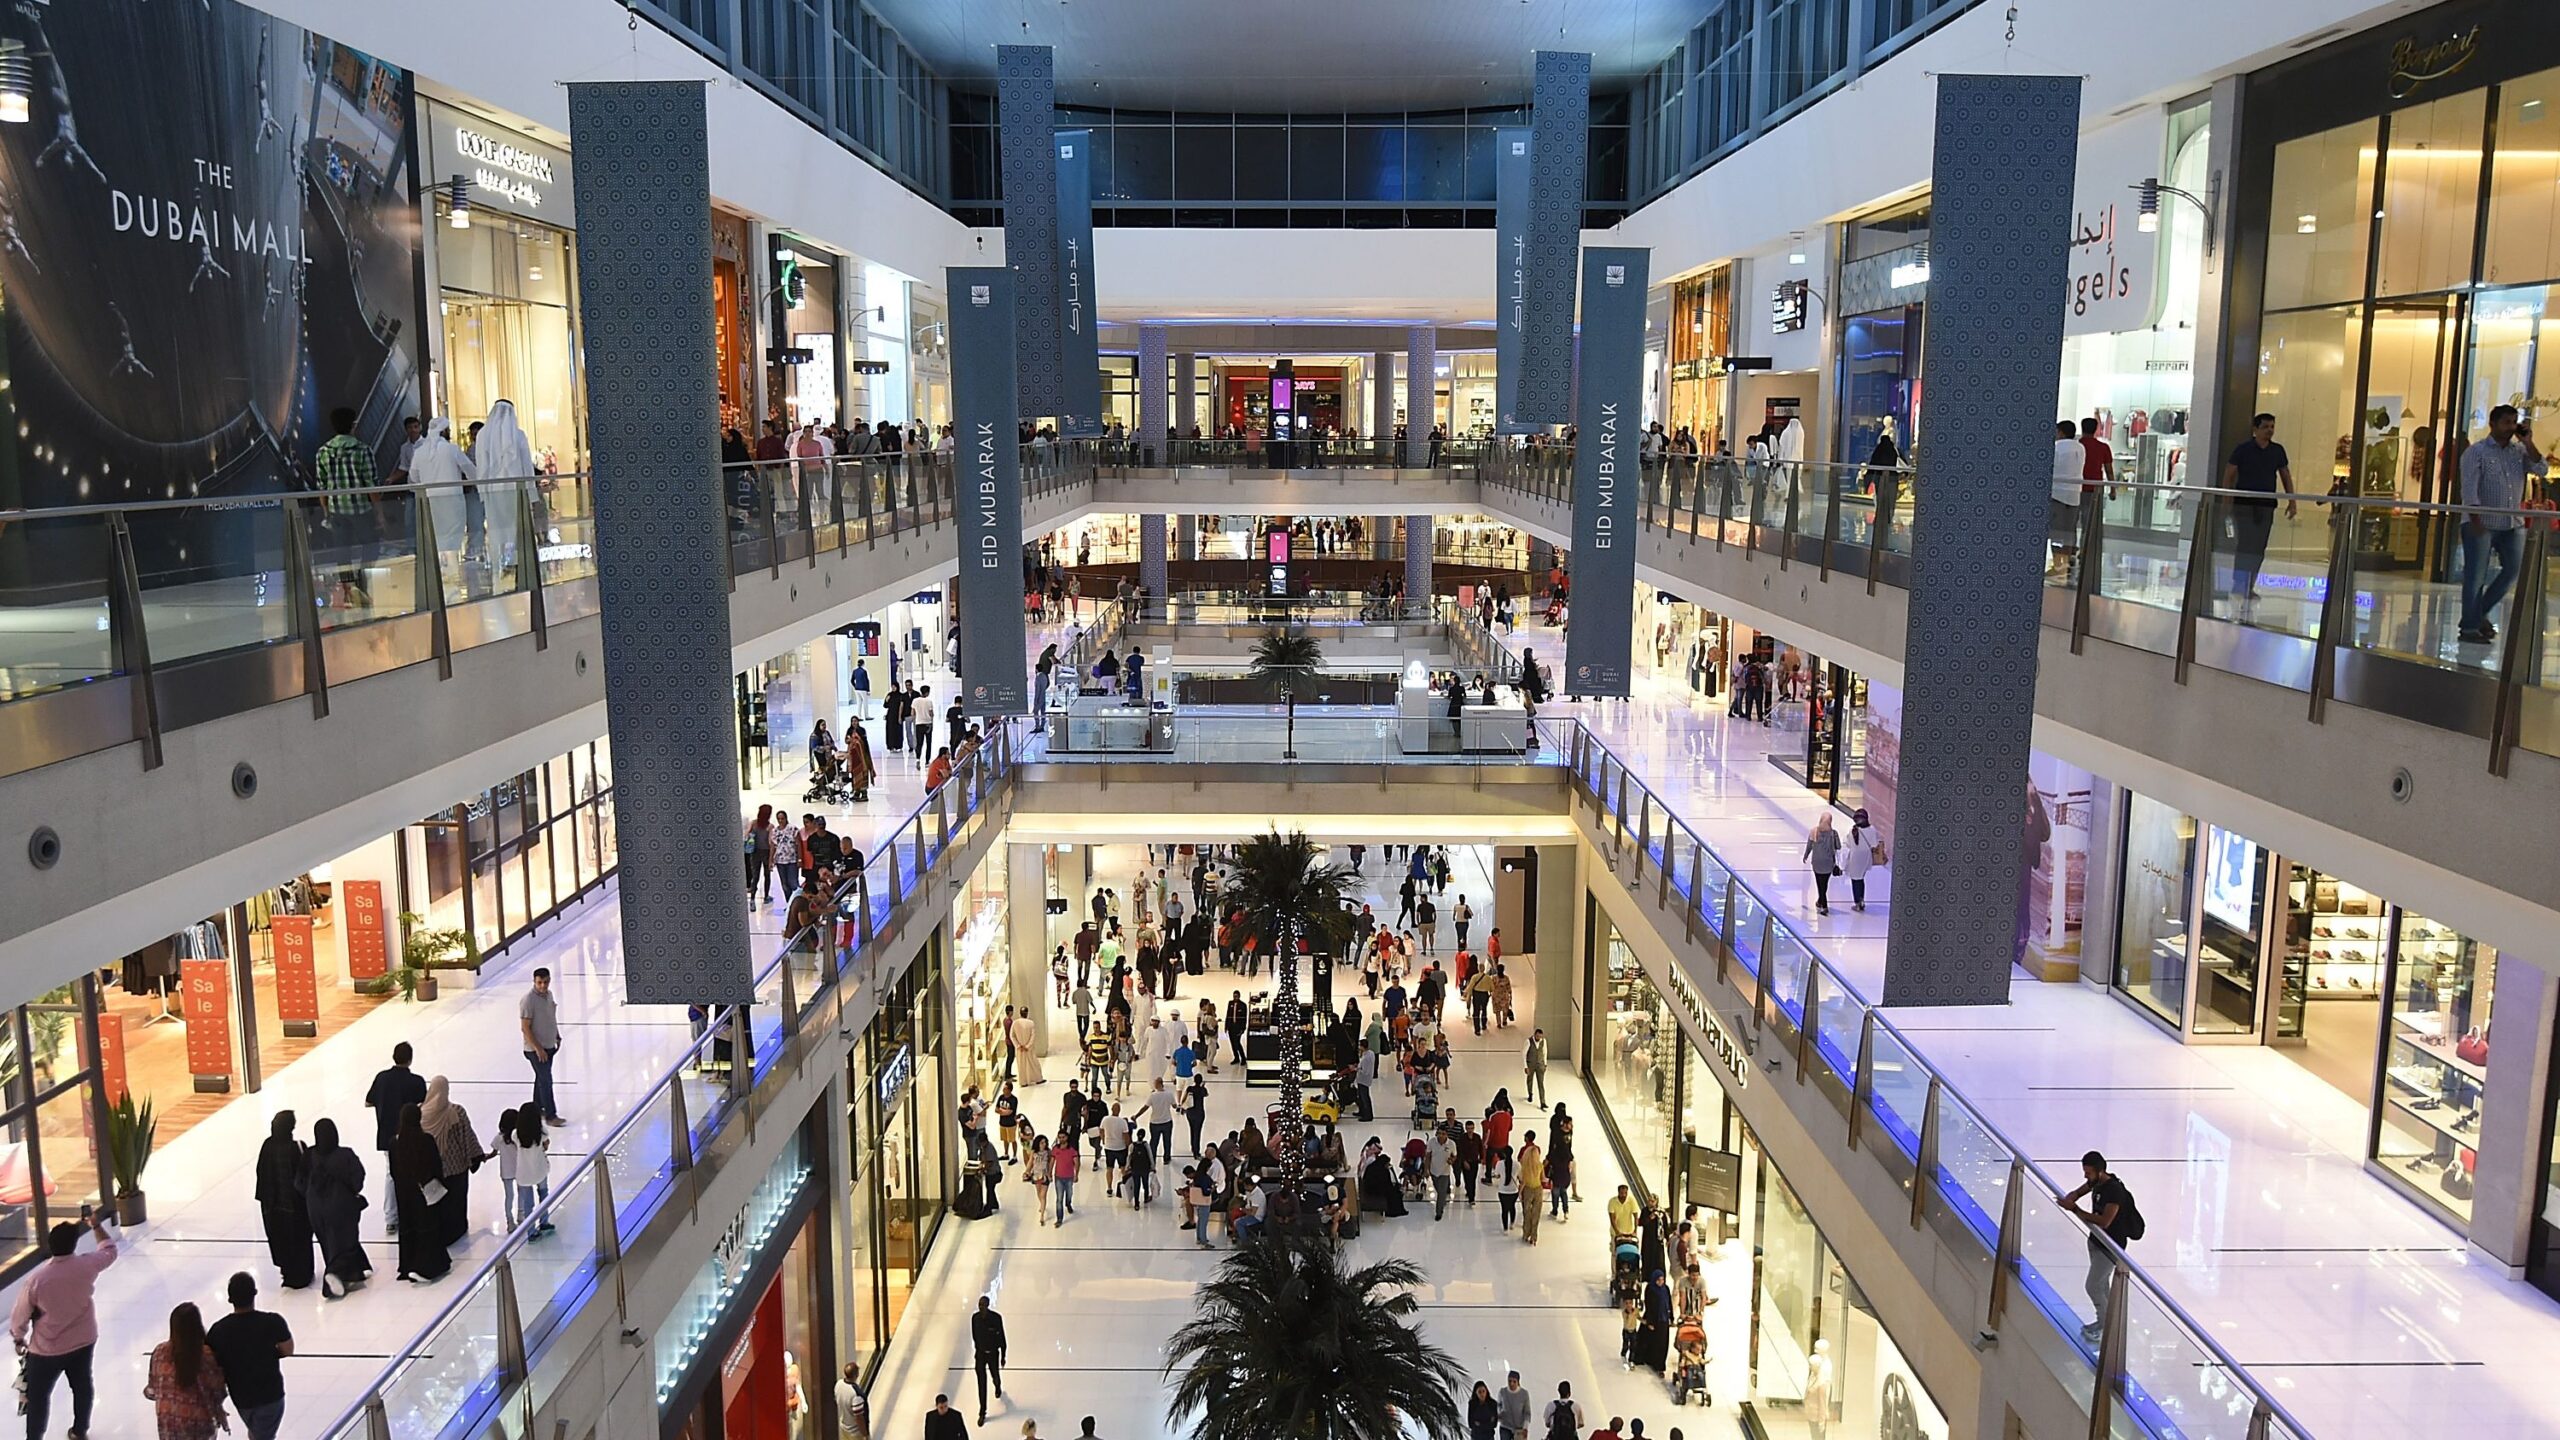 Customers at Dubai shopping malls can win cash awards in yearly DSF promotions.